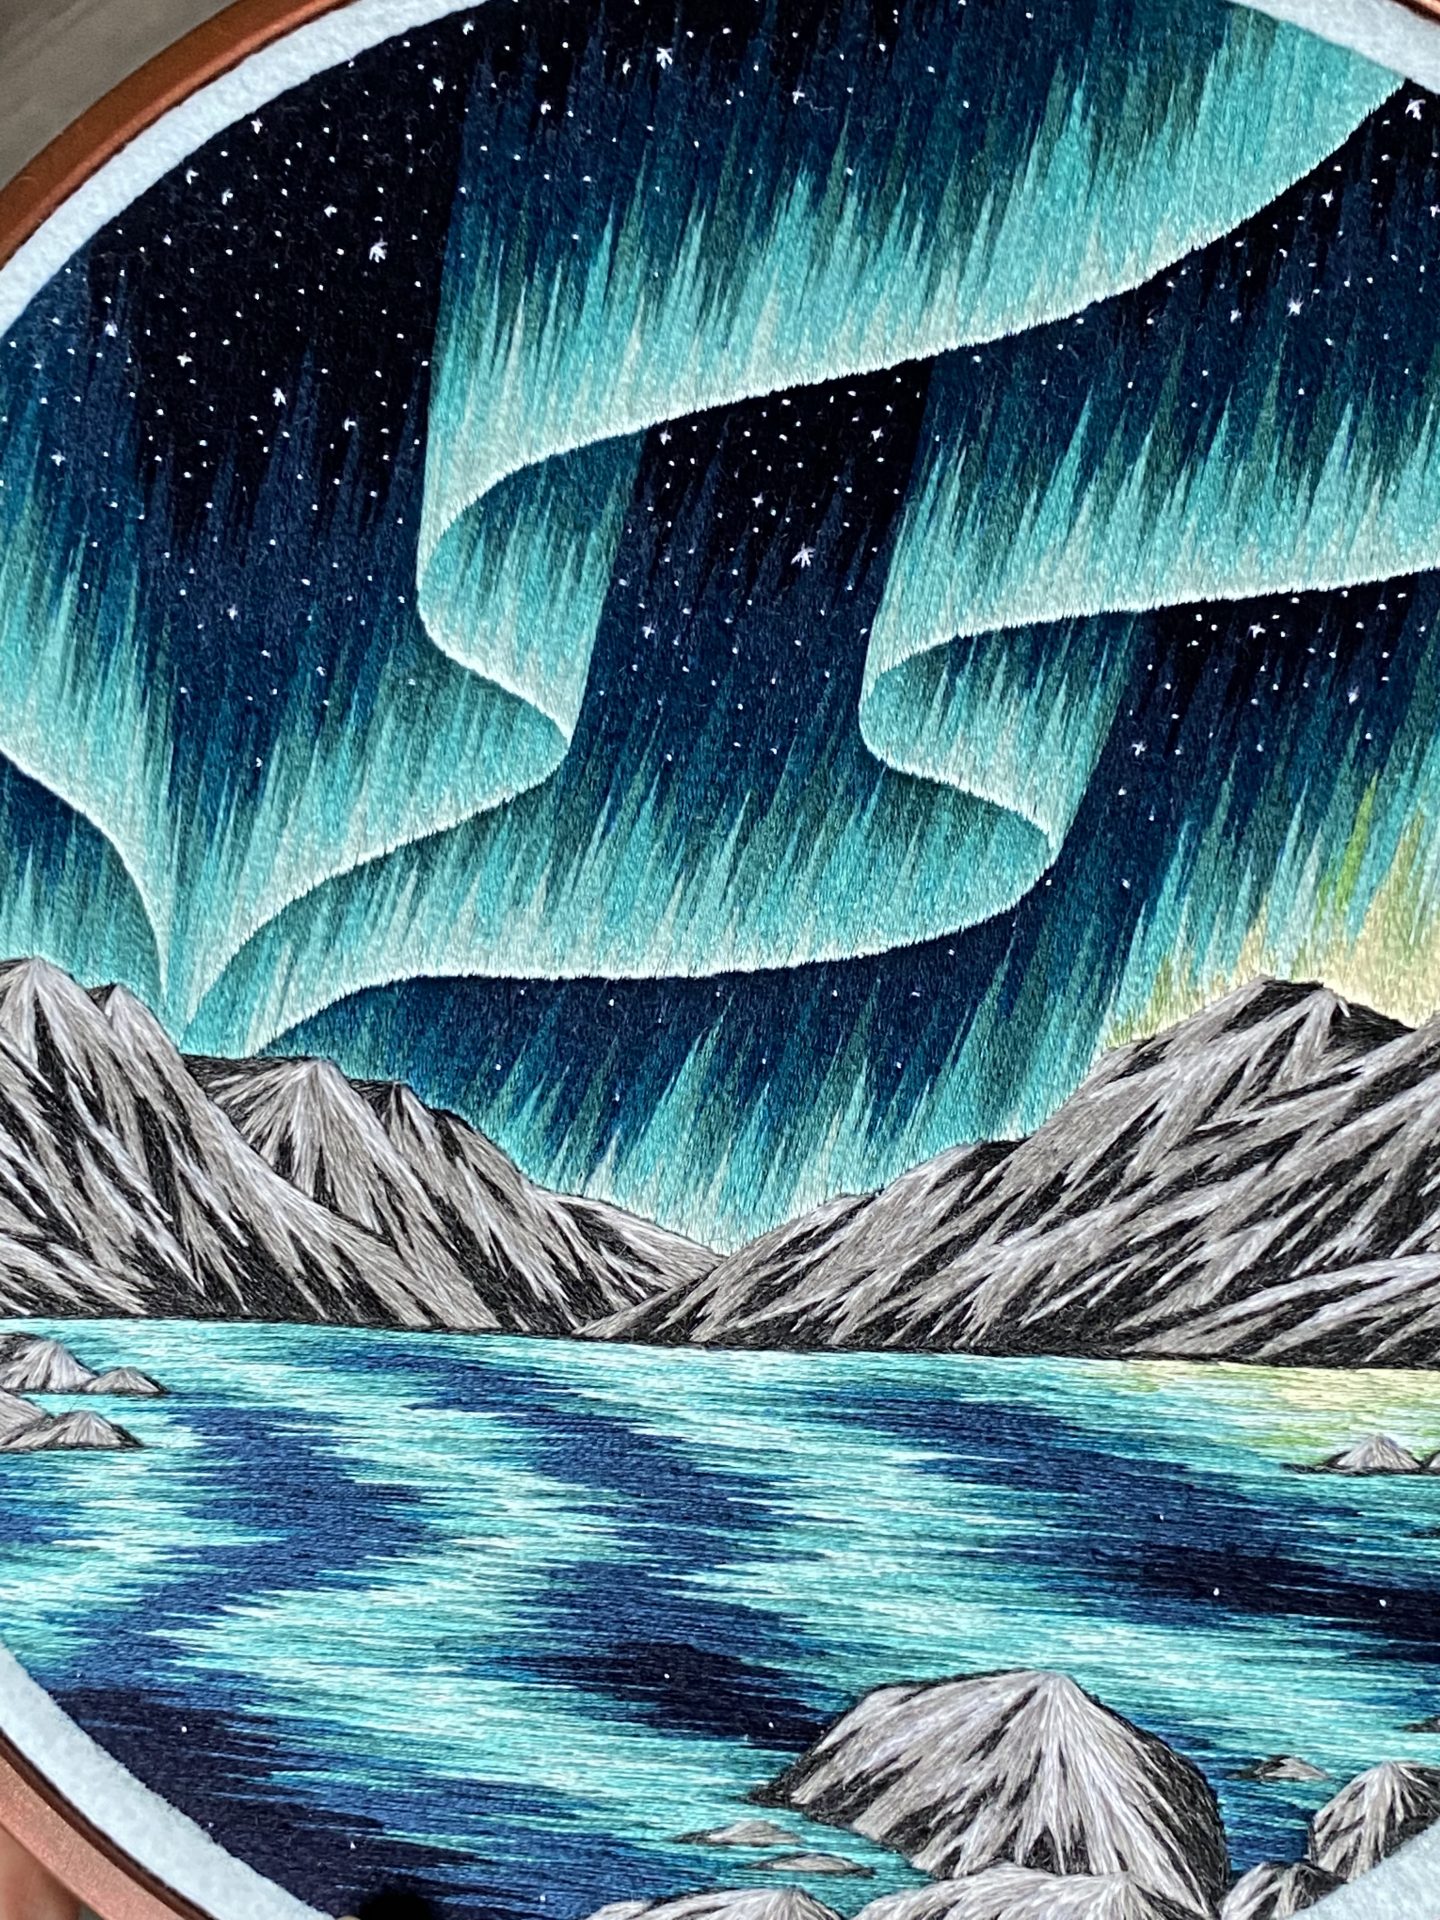 Landscape Embroidery Art Encapsulates the Beauty of the Northern Lights